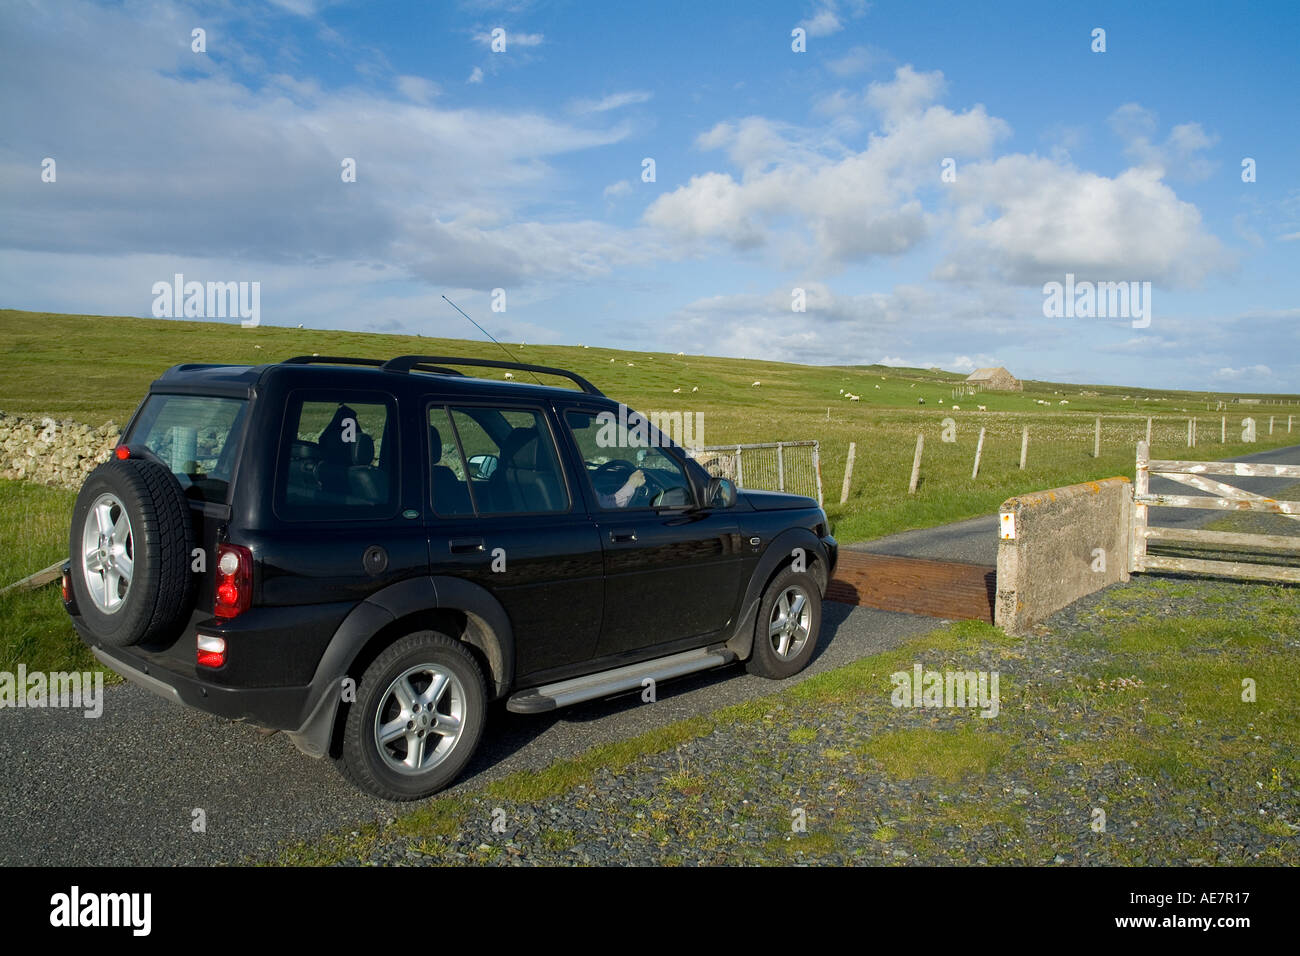 dh freelander LAND ROVER UK 4x4 suv cattle grid in country road landrover shetland car Stock Photo